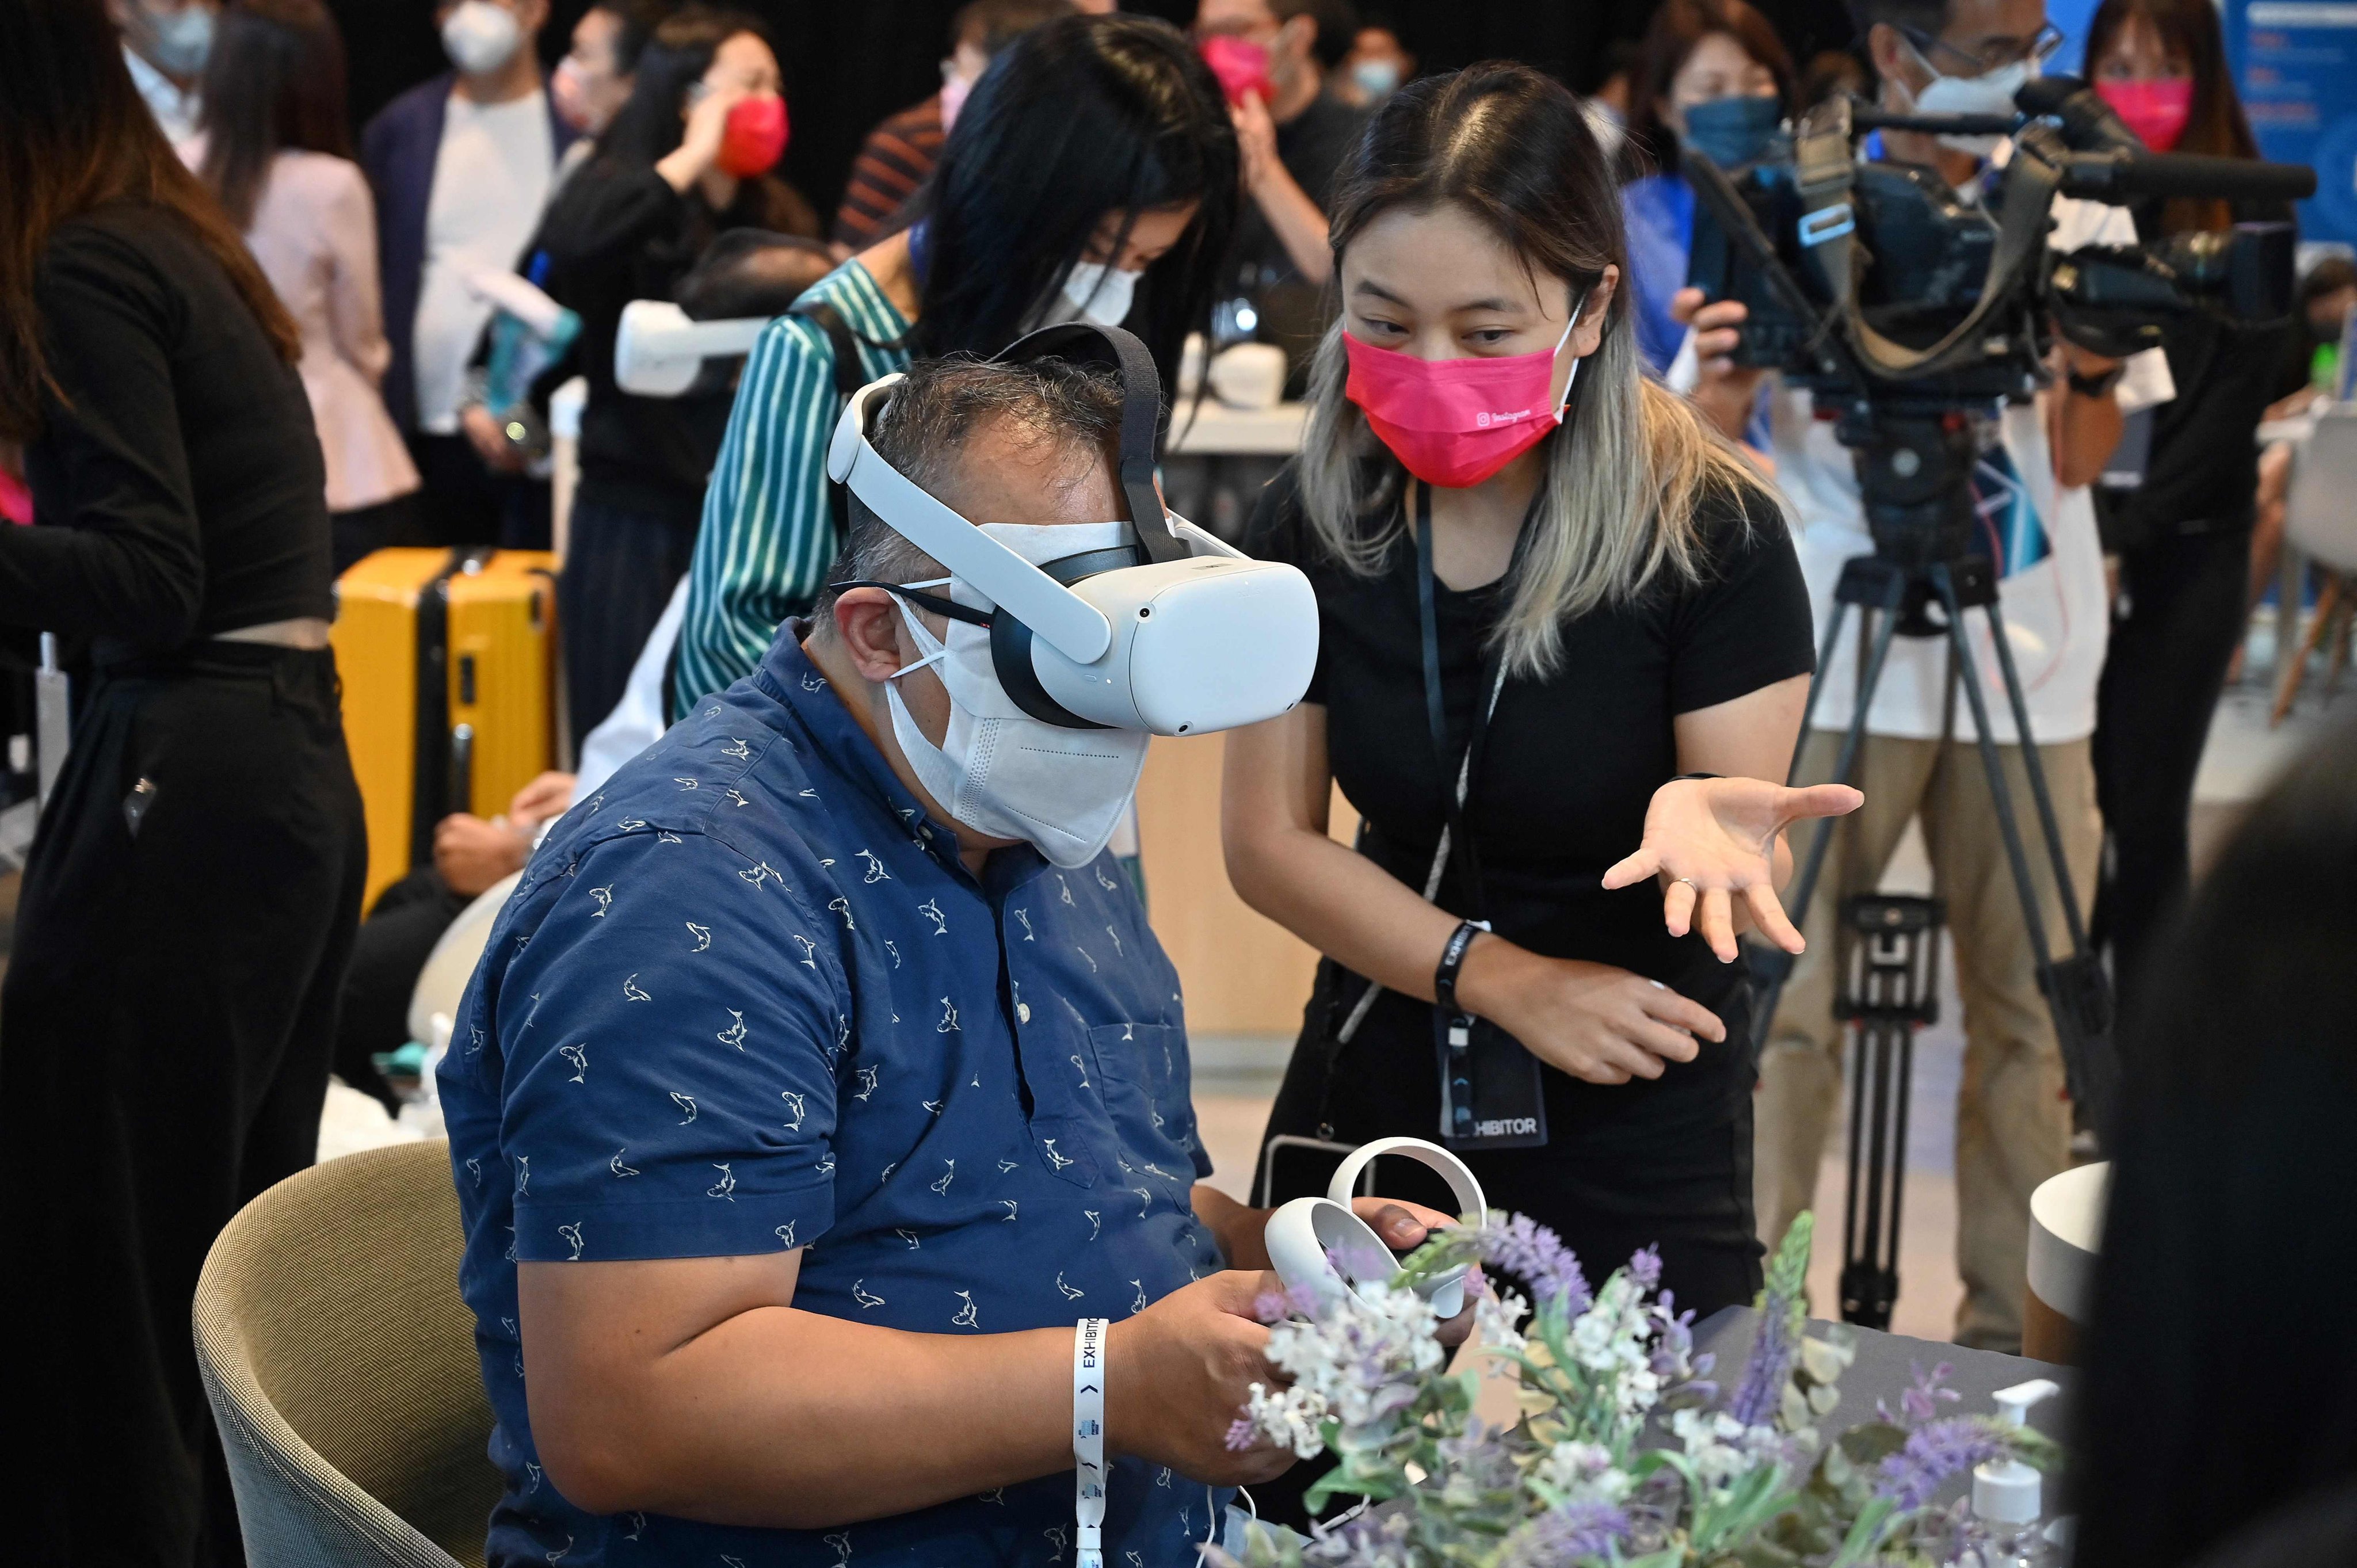 A visitor uses a virtual reality headset at the Meta booth on the first day of Fintech Week in Hong Kong on October 31, 2022. Photo: AFP